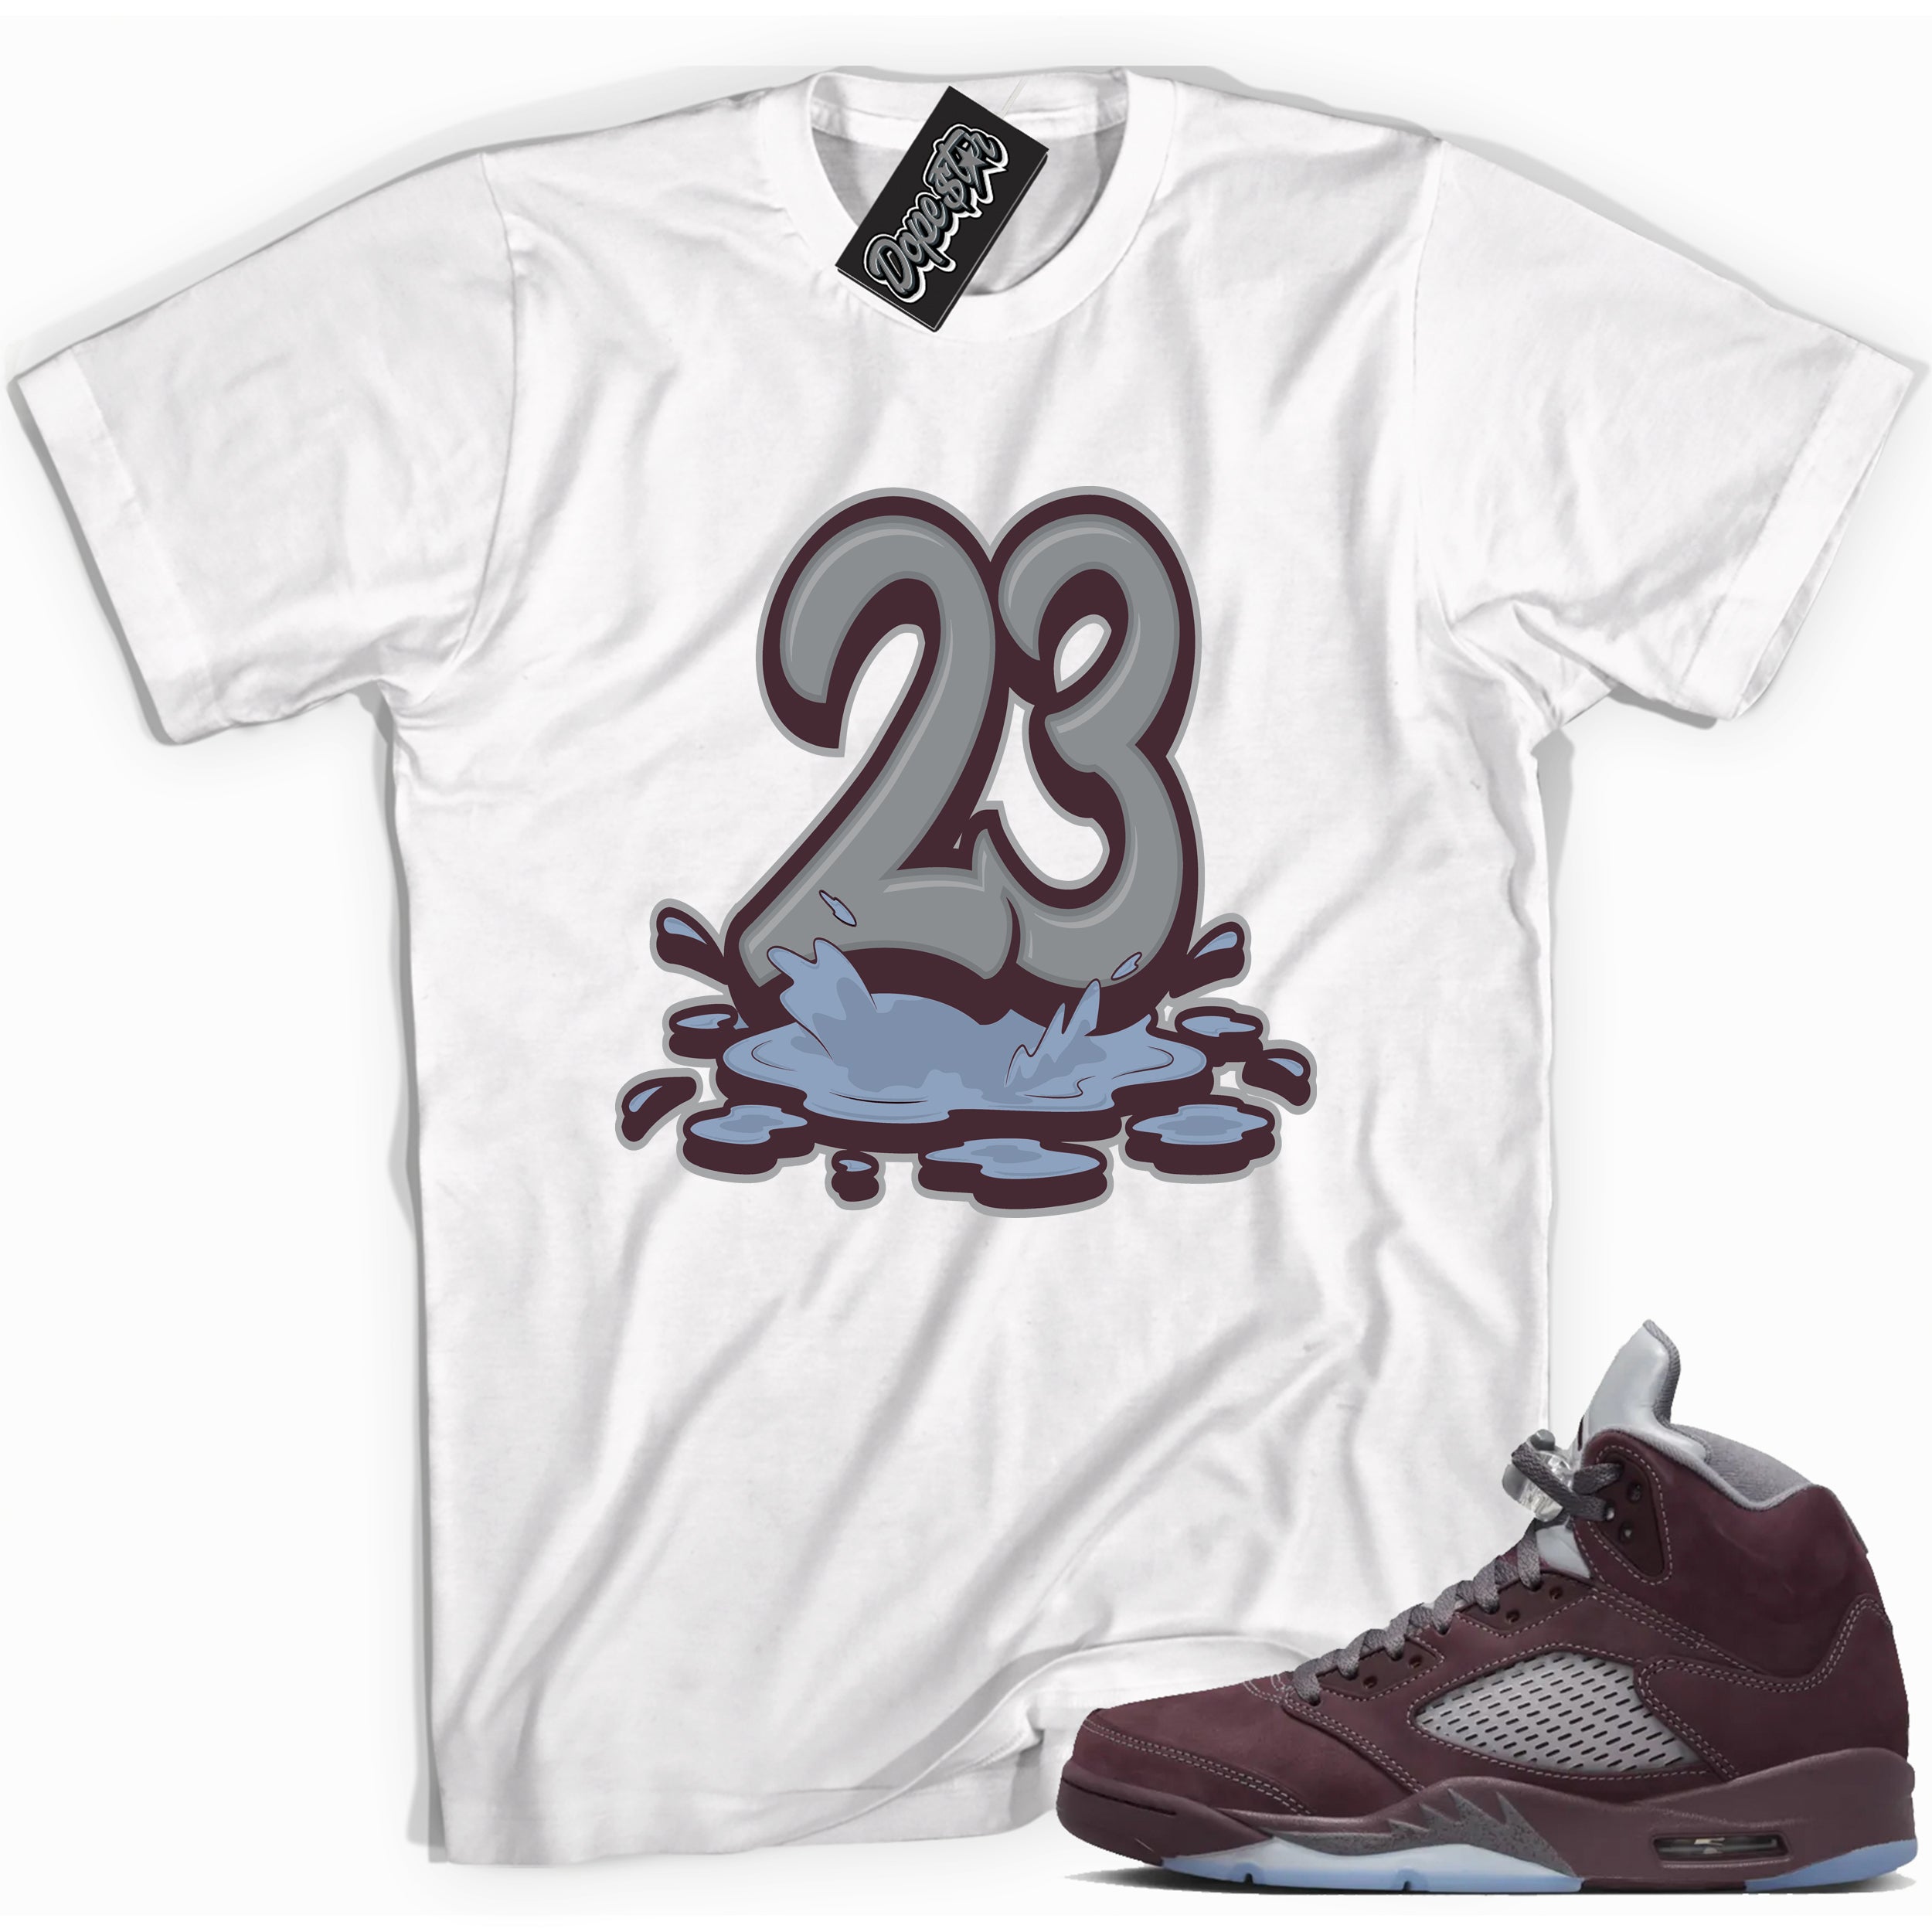 Cool White graphic tee with “ 23 Melting ” print, that perfectly matches Air Jordan 5 Burgundy 2023 sneakers 